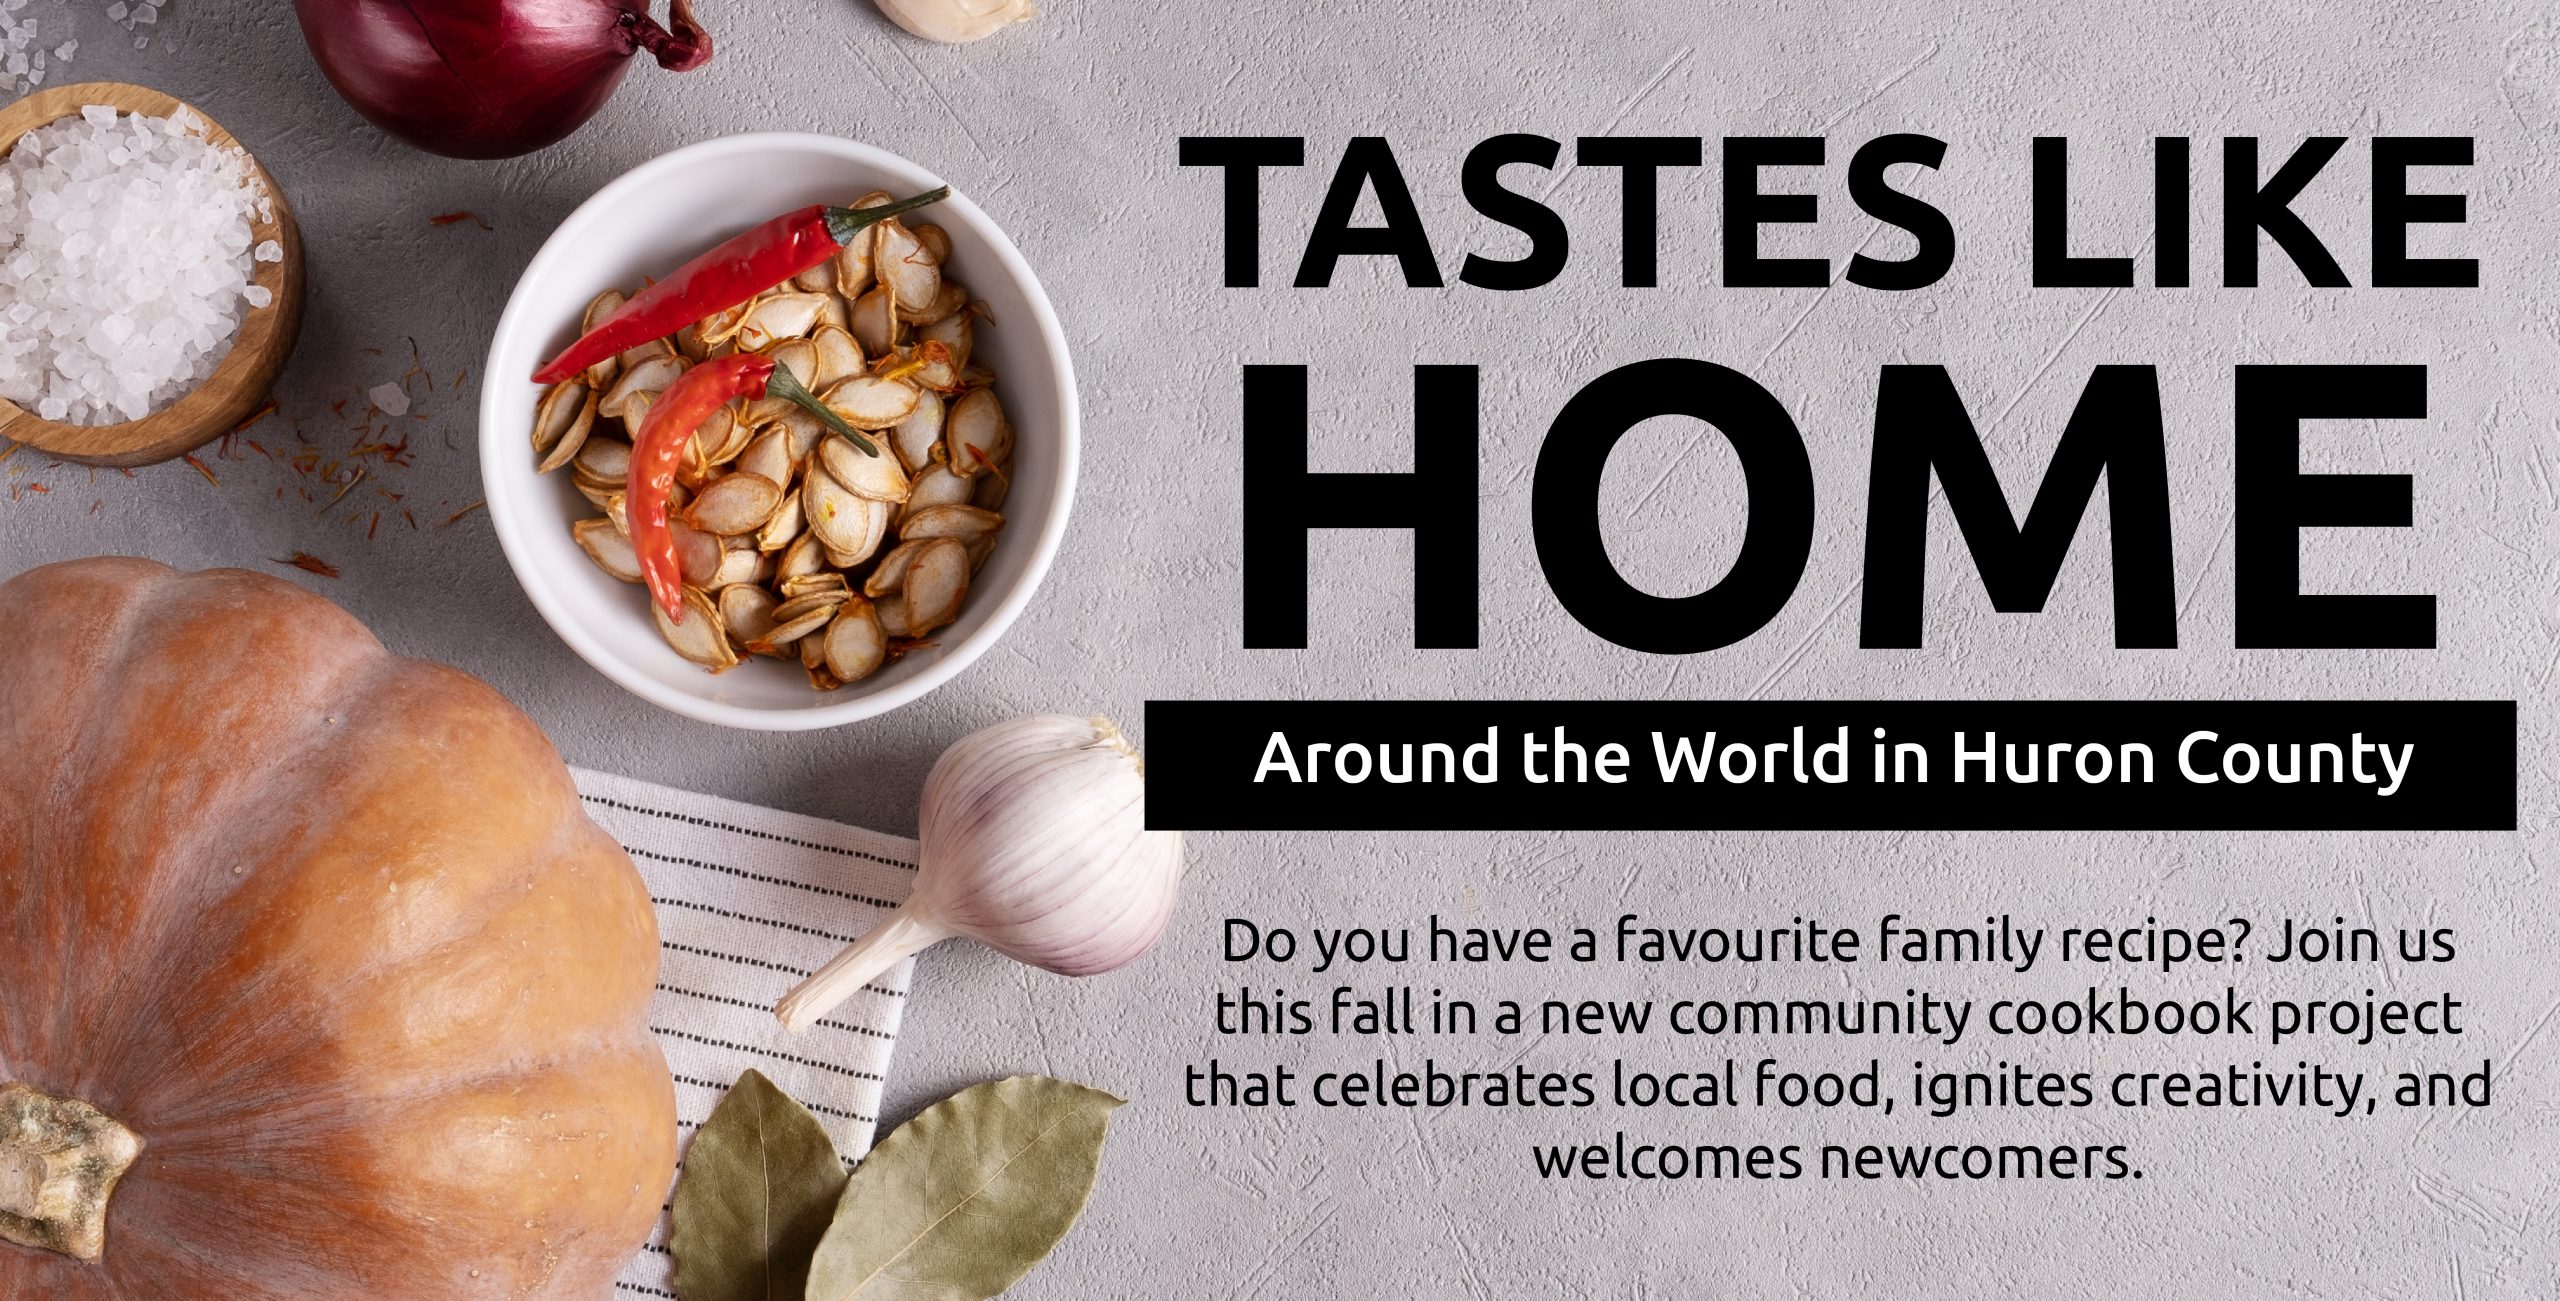 Image of a pumpkin, peppers, garlic, salt, onions, with text promoting Tastes Like Home community cookbook project